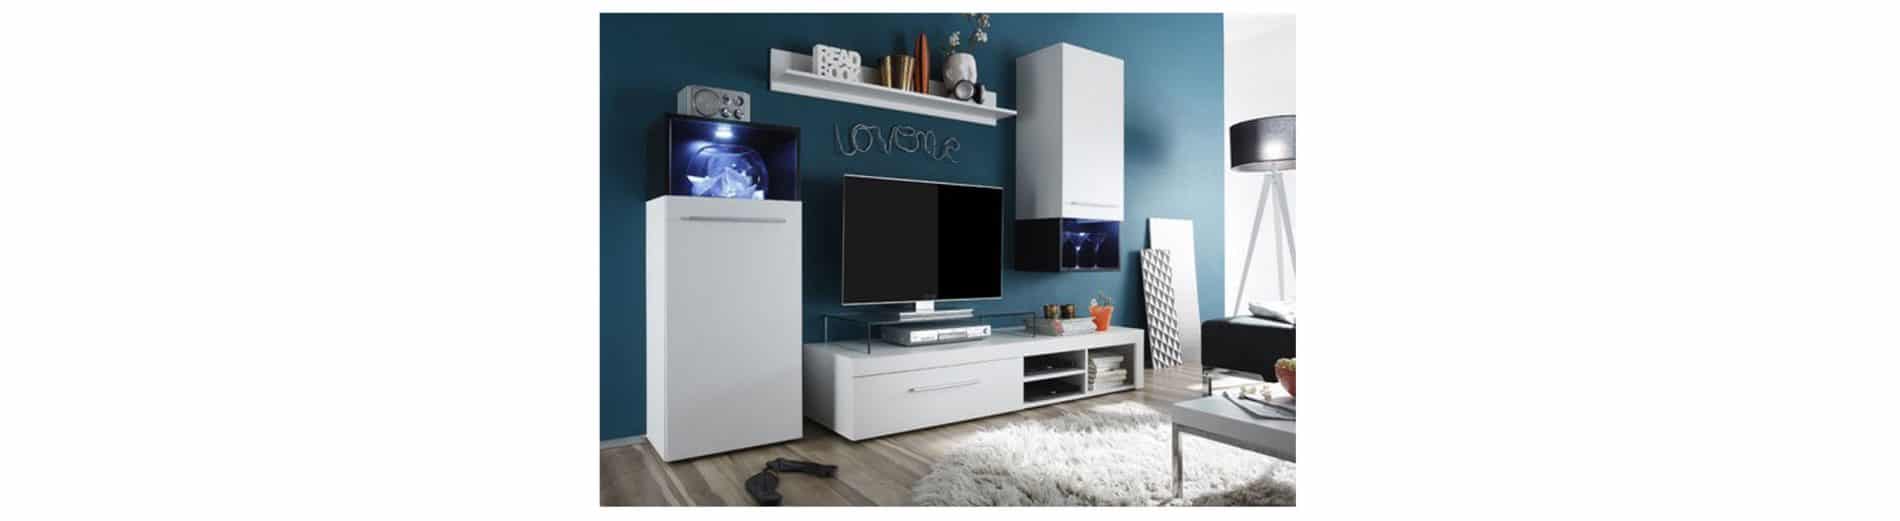 White Living Room Furniture Range: 4 Different Styles To Choose From